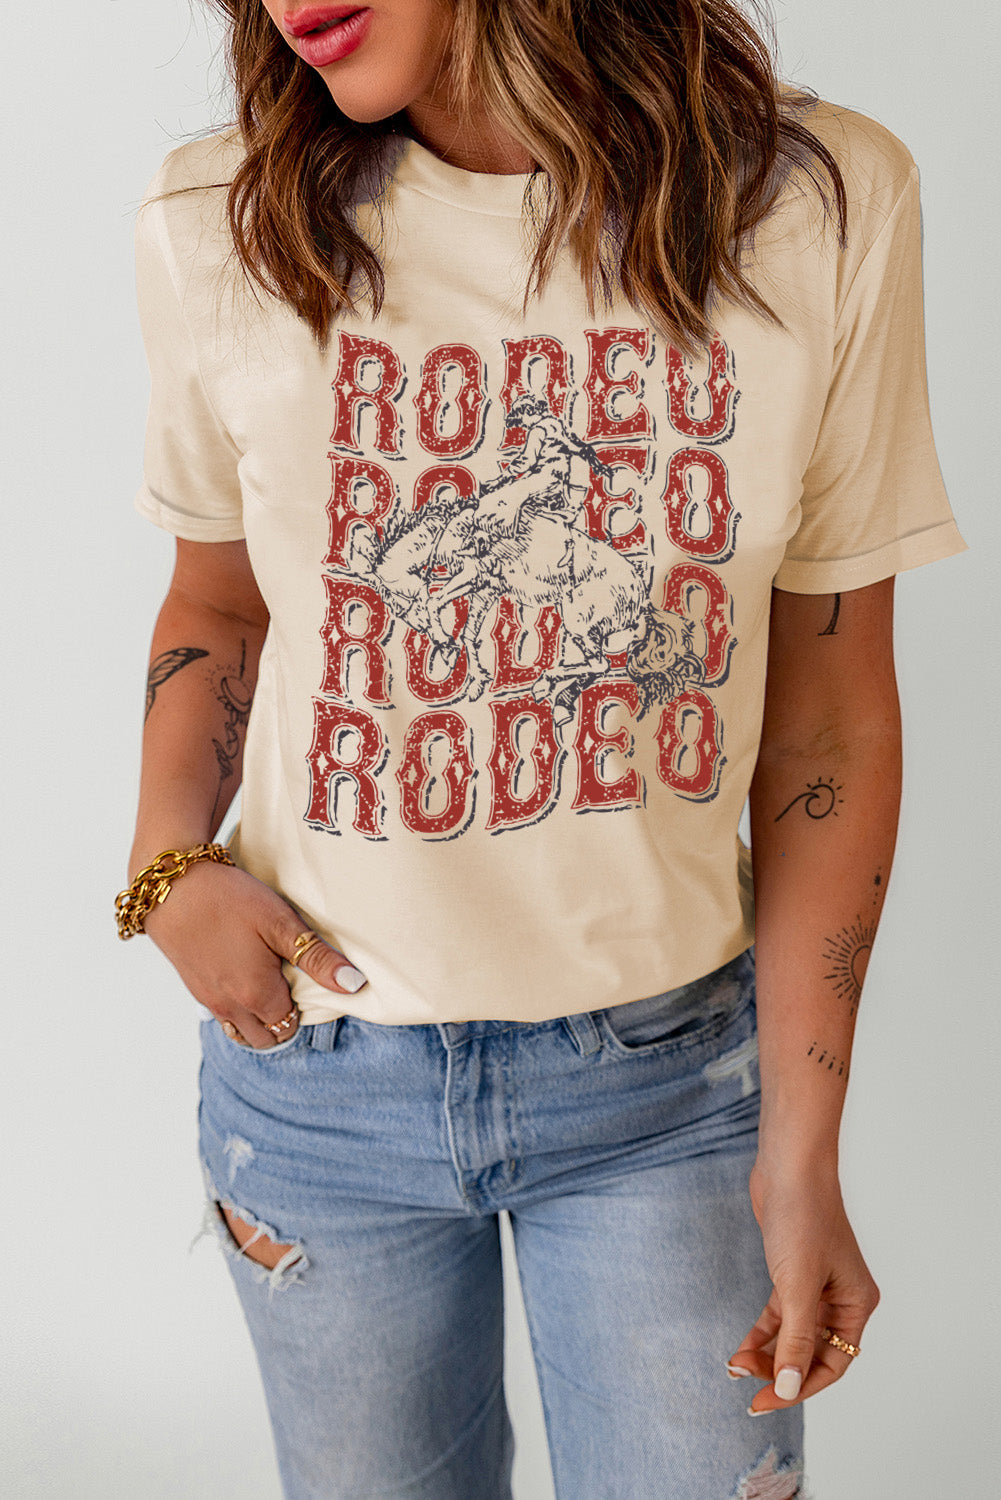 Rodeo graphic cuffed t shirt